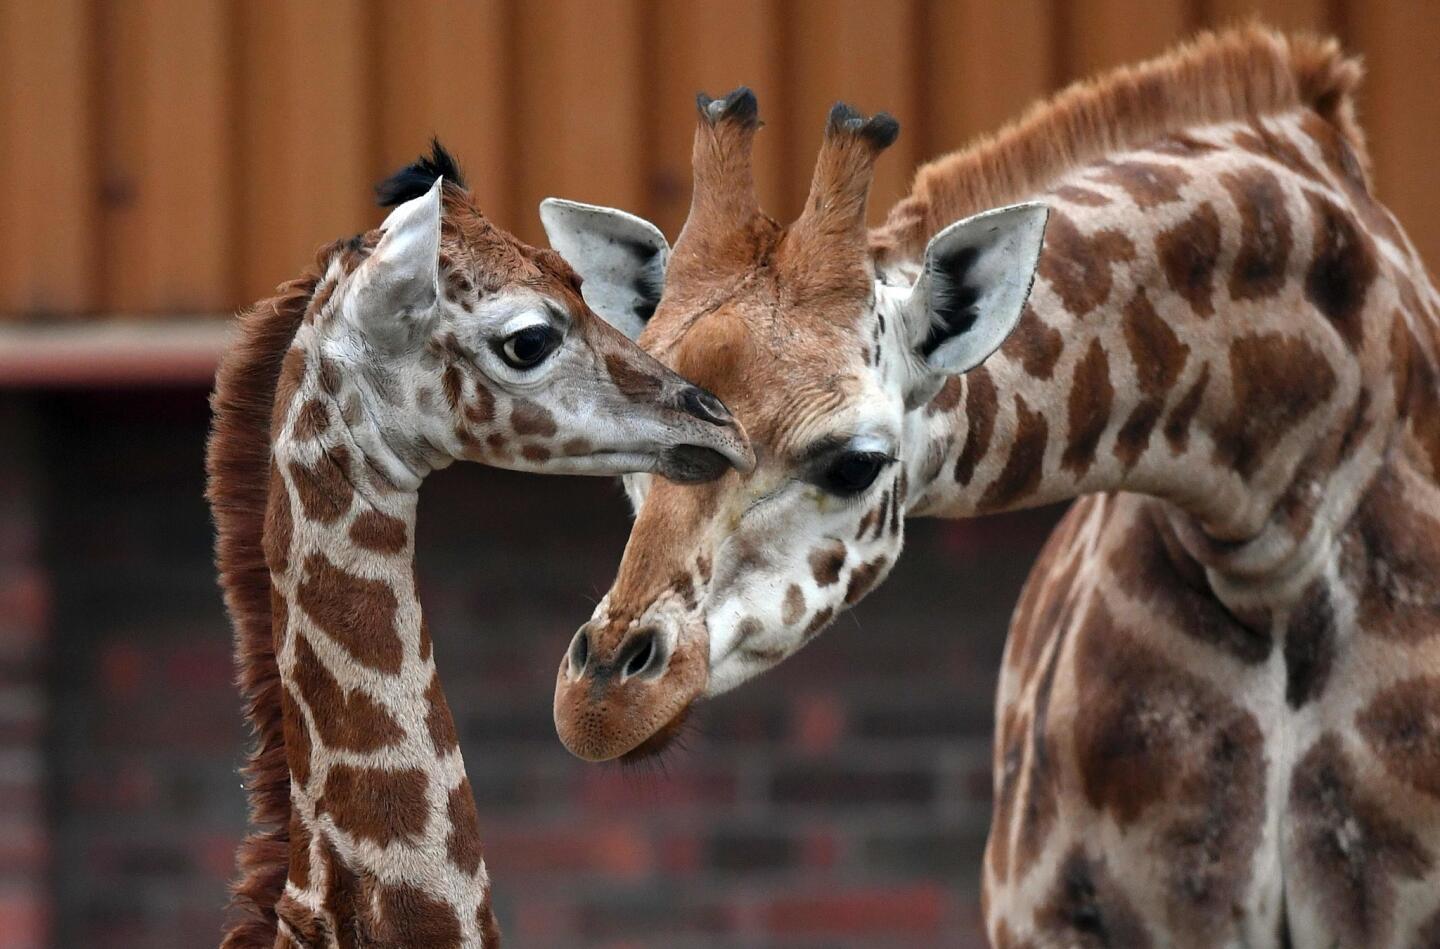 Murchison, a baby Rothschild's giraffe, receives attention from another giraffe as he ventures out of the Giraffe House at Chester Zoo in Chester, England, on Jan. 19, 2017, for the first time. The zoo celebrated the birth of the rare Rothschild's giraffe calf, whose numbers have dwindled to fewer than 1,600 in its native Kenya and Uganda.